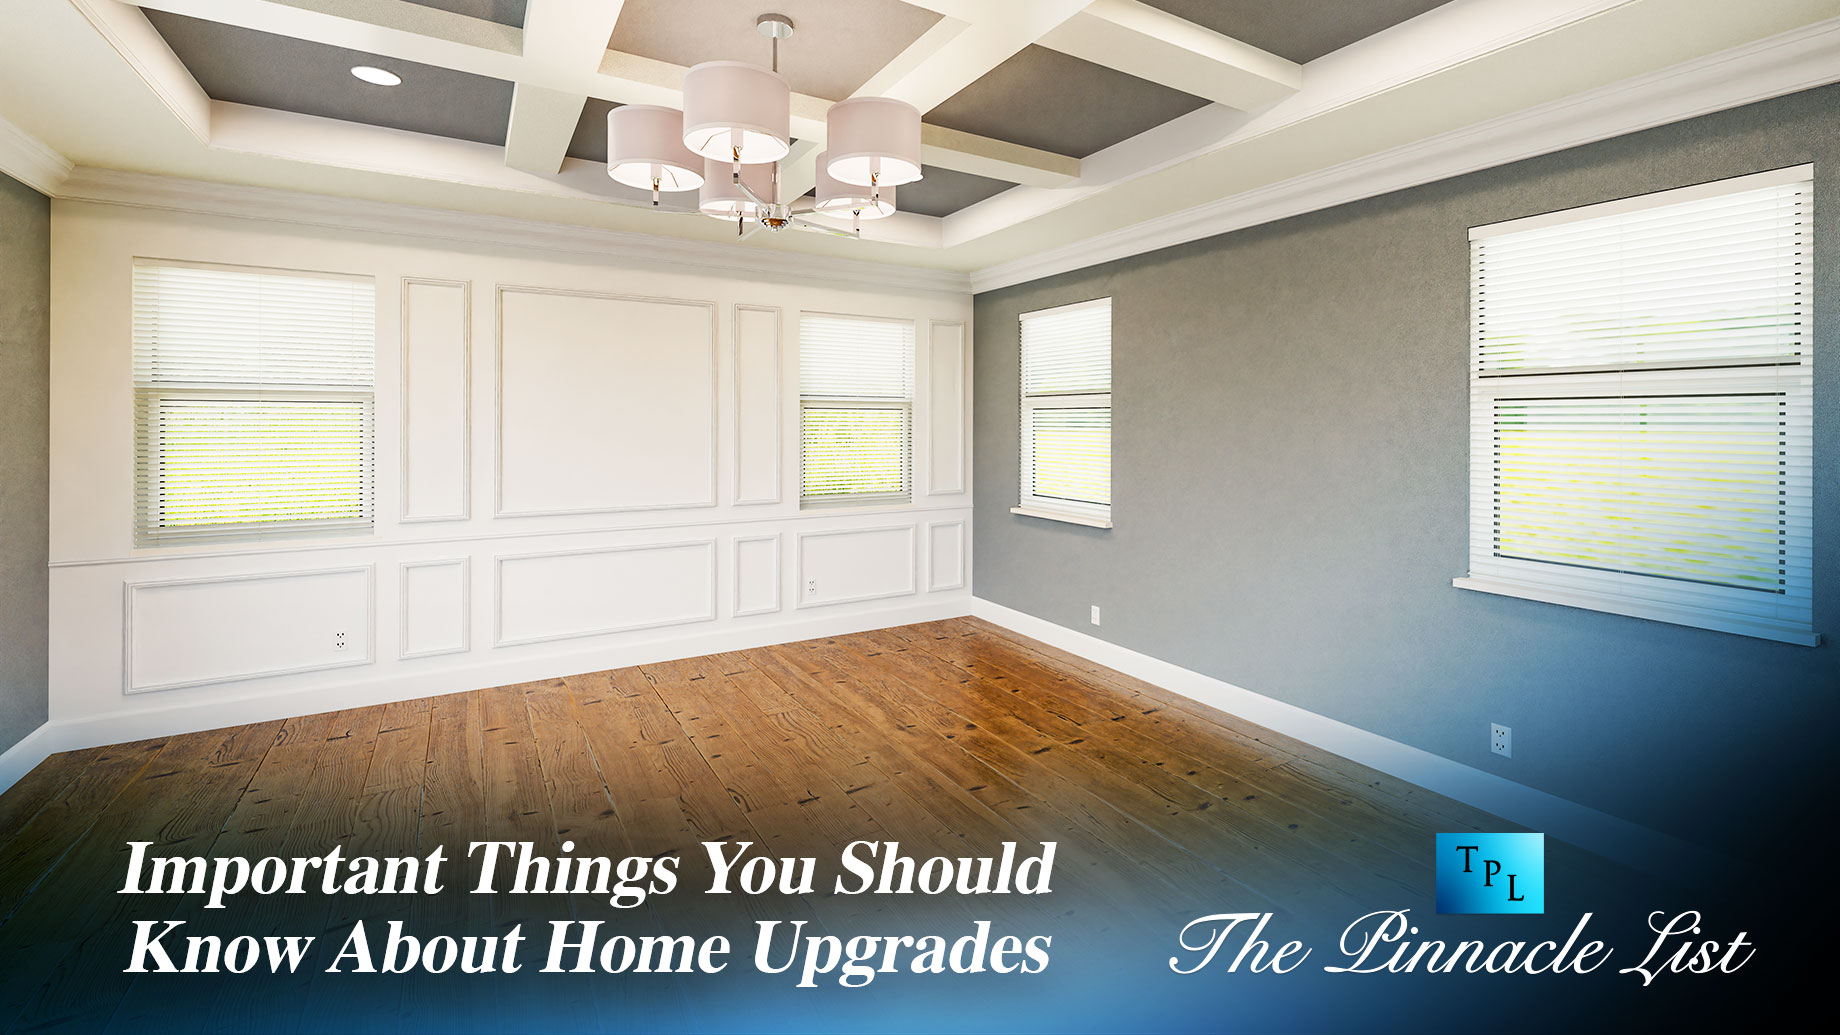 Important Things You Should Know About Home Upgrades